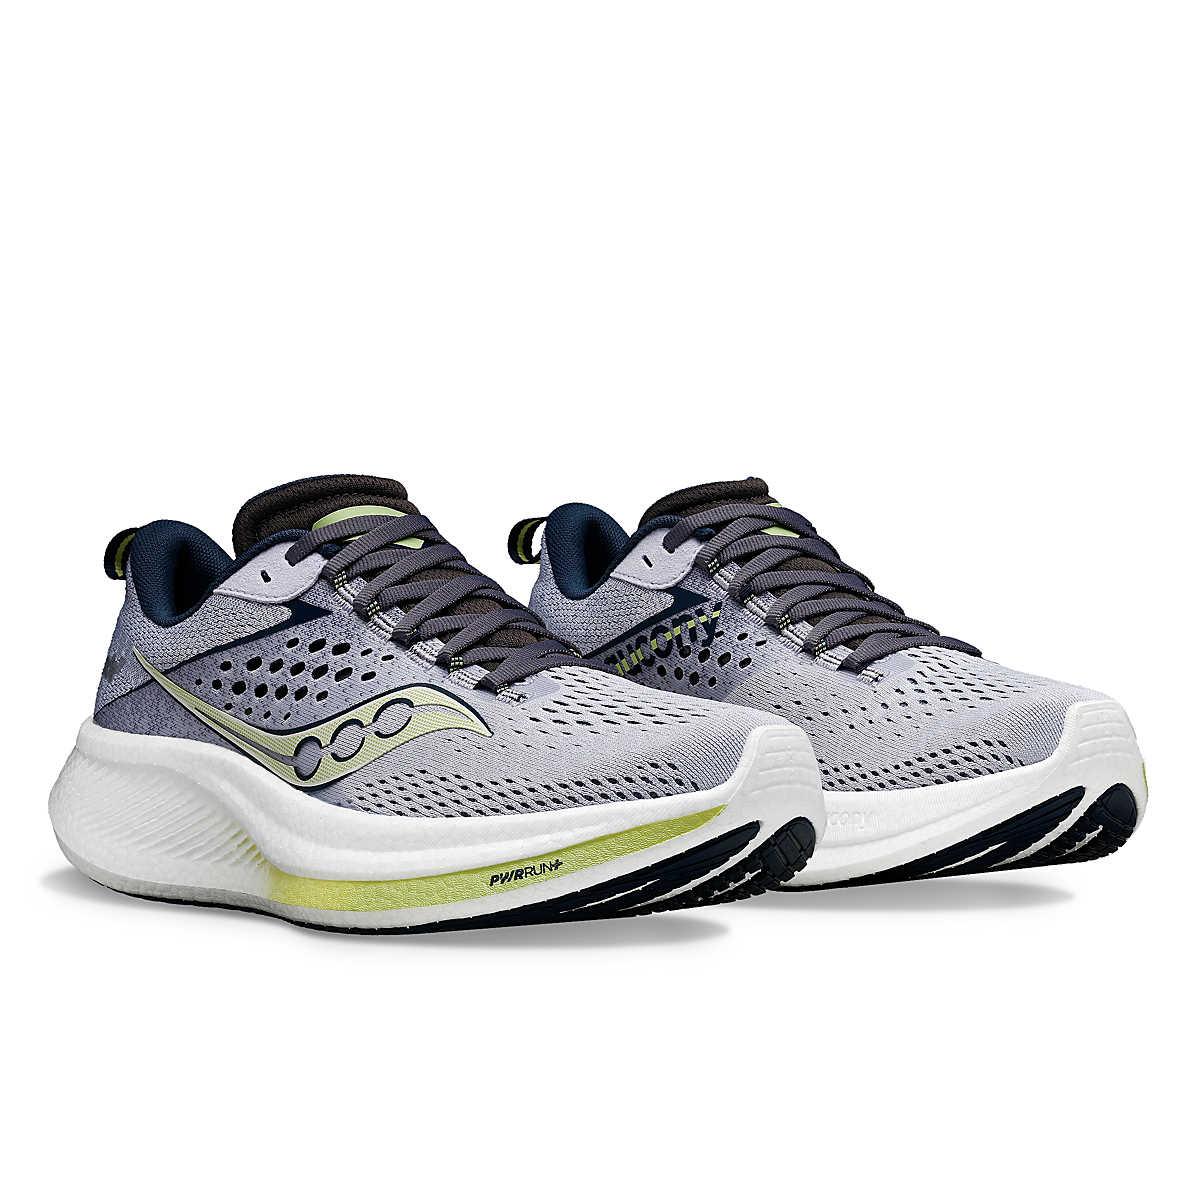 Saucony - Saucony Women's Ride 17 Running Shoe - The Shoe Collective